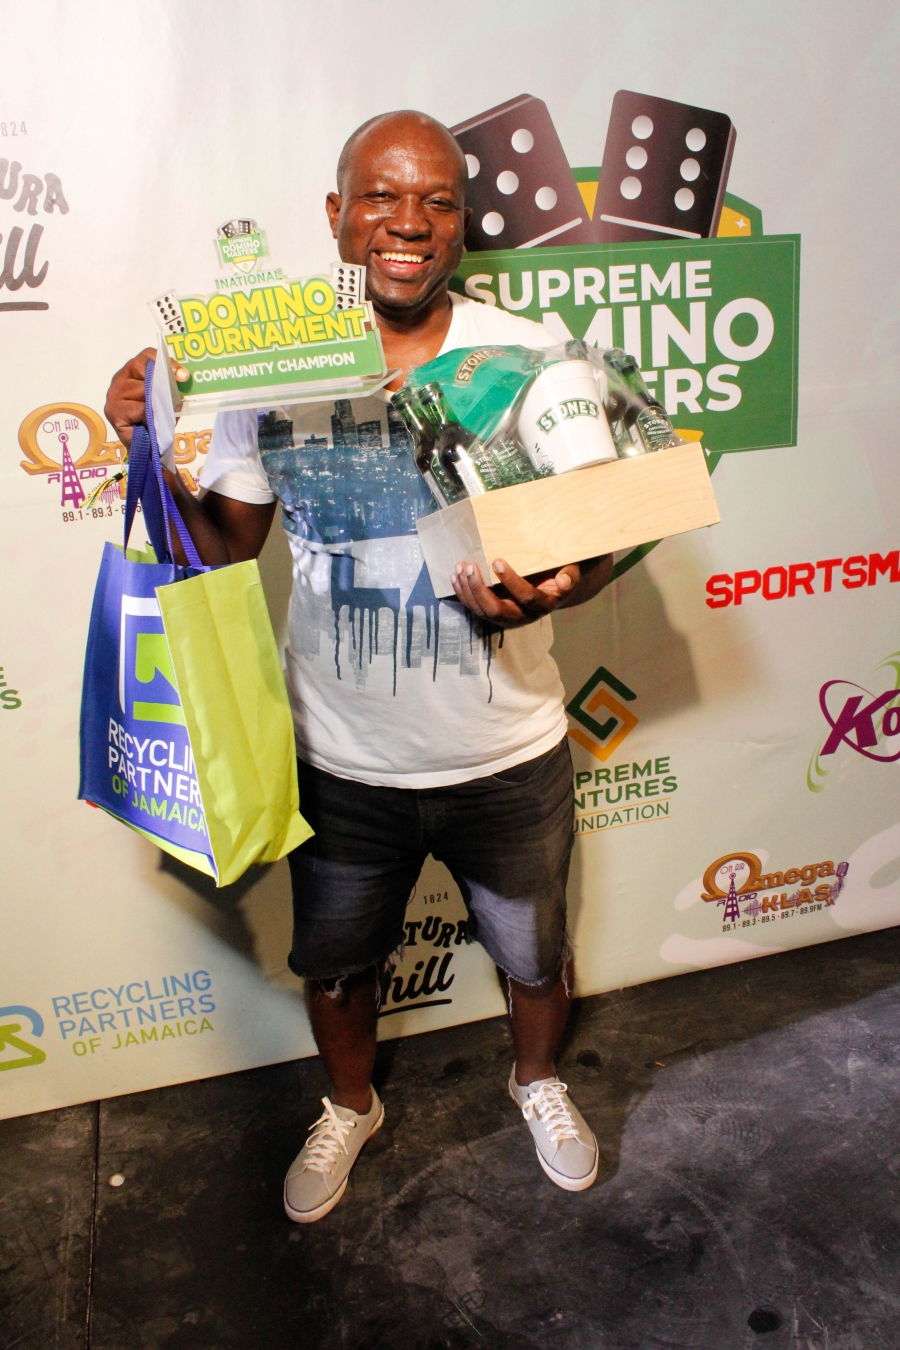 Garfield Brissett exudes sheer excitement as he poses with his winning prizes on Sunday at Maggie’s Sports Bar at the Supreme Domino Master Series.